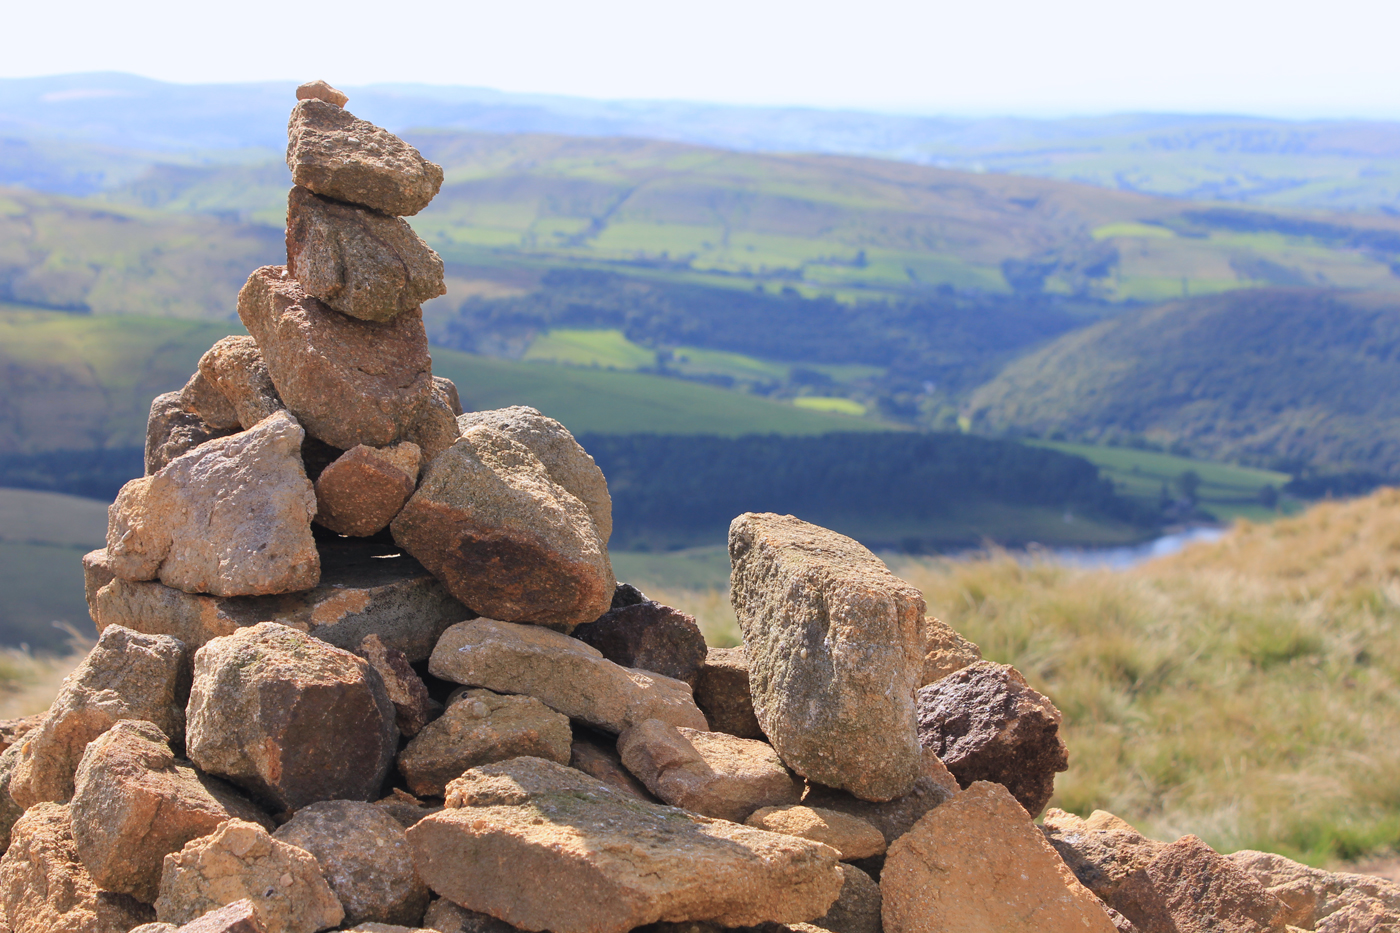 A Cairn up on Kinder Scout